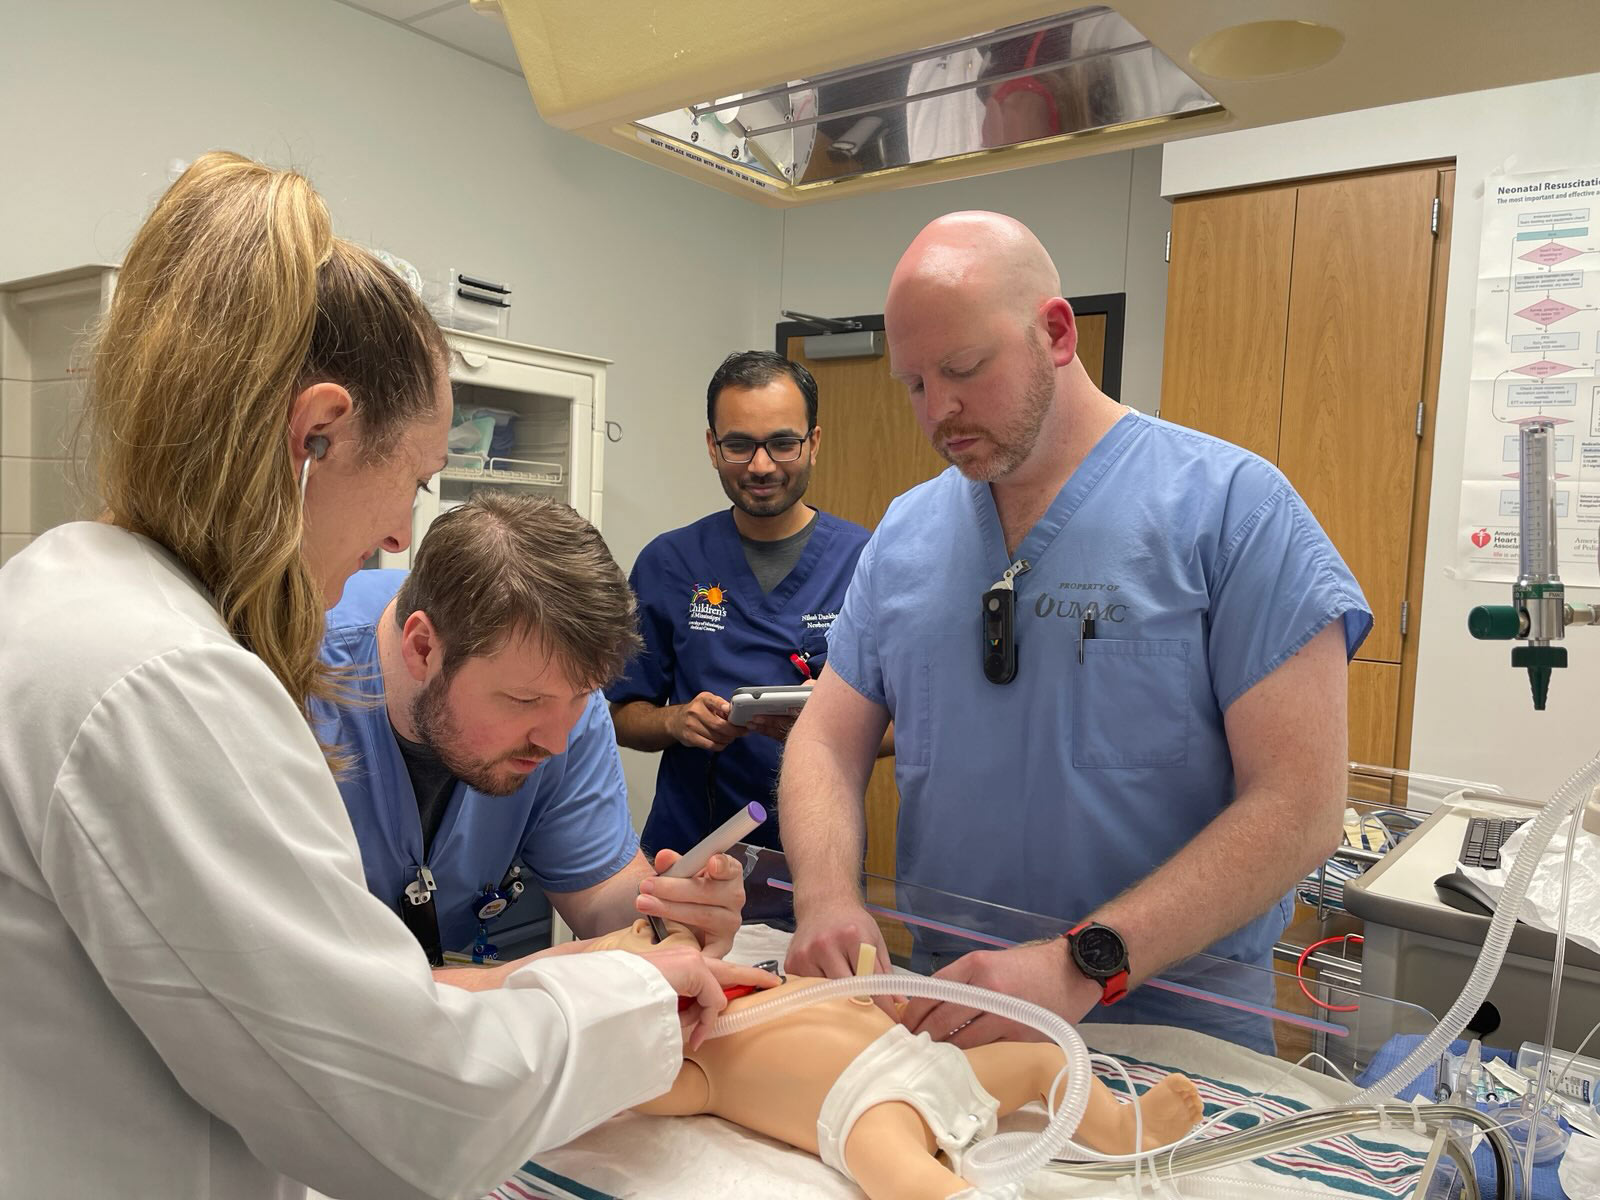 Three medical students simulating an intubation on an infant dummy as a doctor looks on.